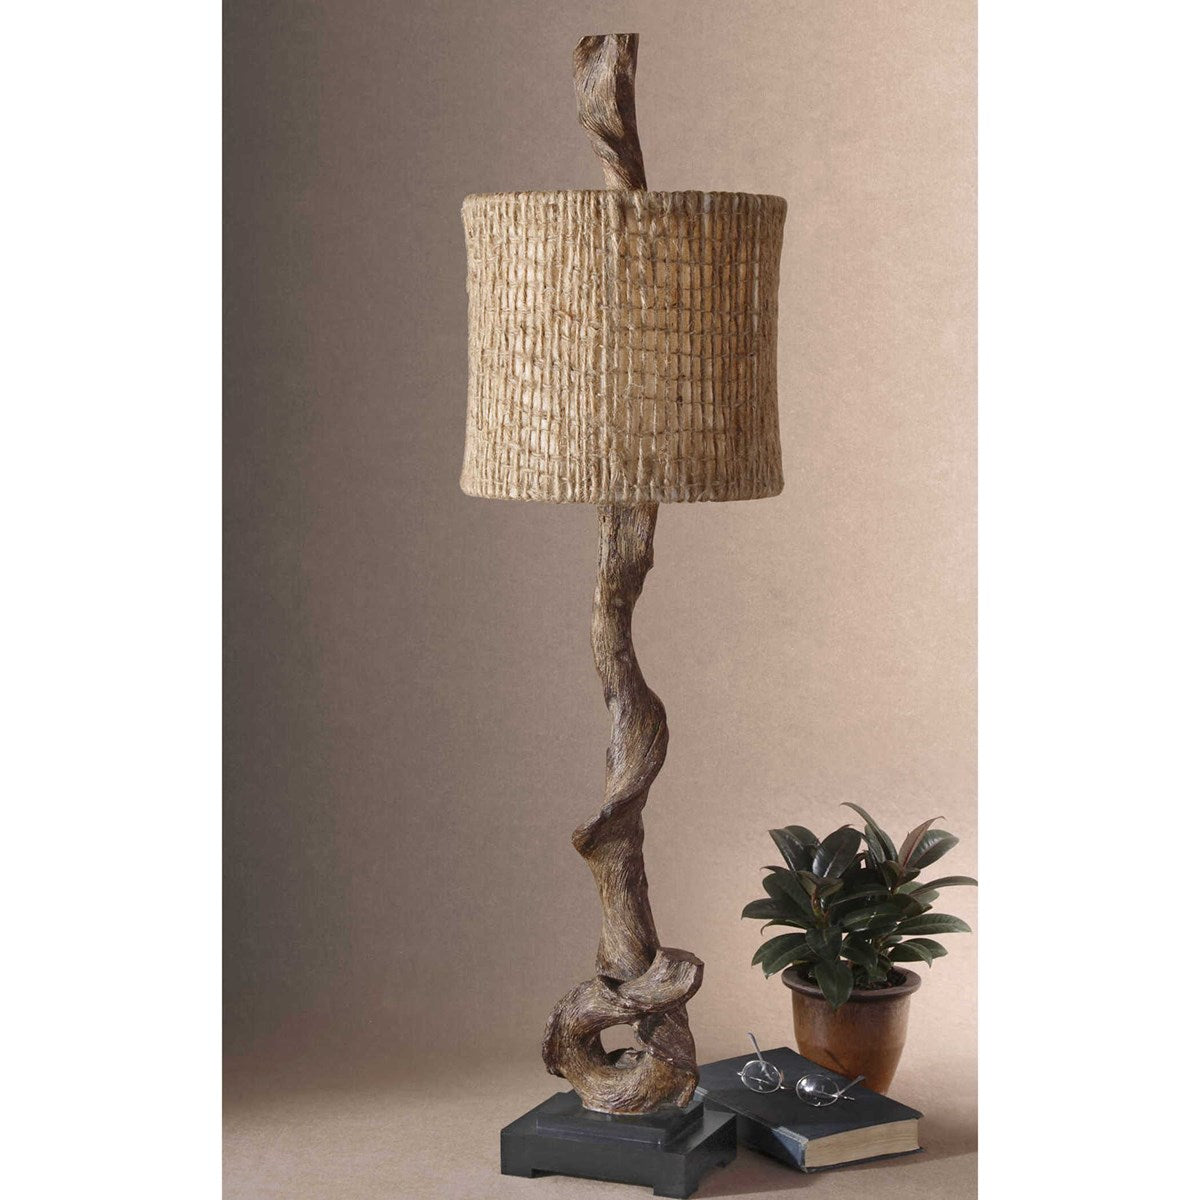 Weathered driftwood finish with a matching finial and a matte black base. The round drum shade is burlap twine with an open weave construction and a beige inner liner.